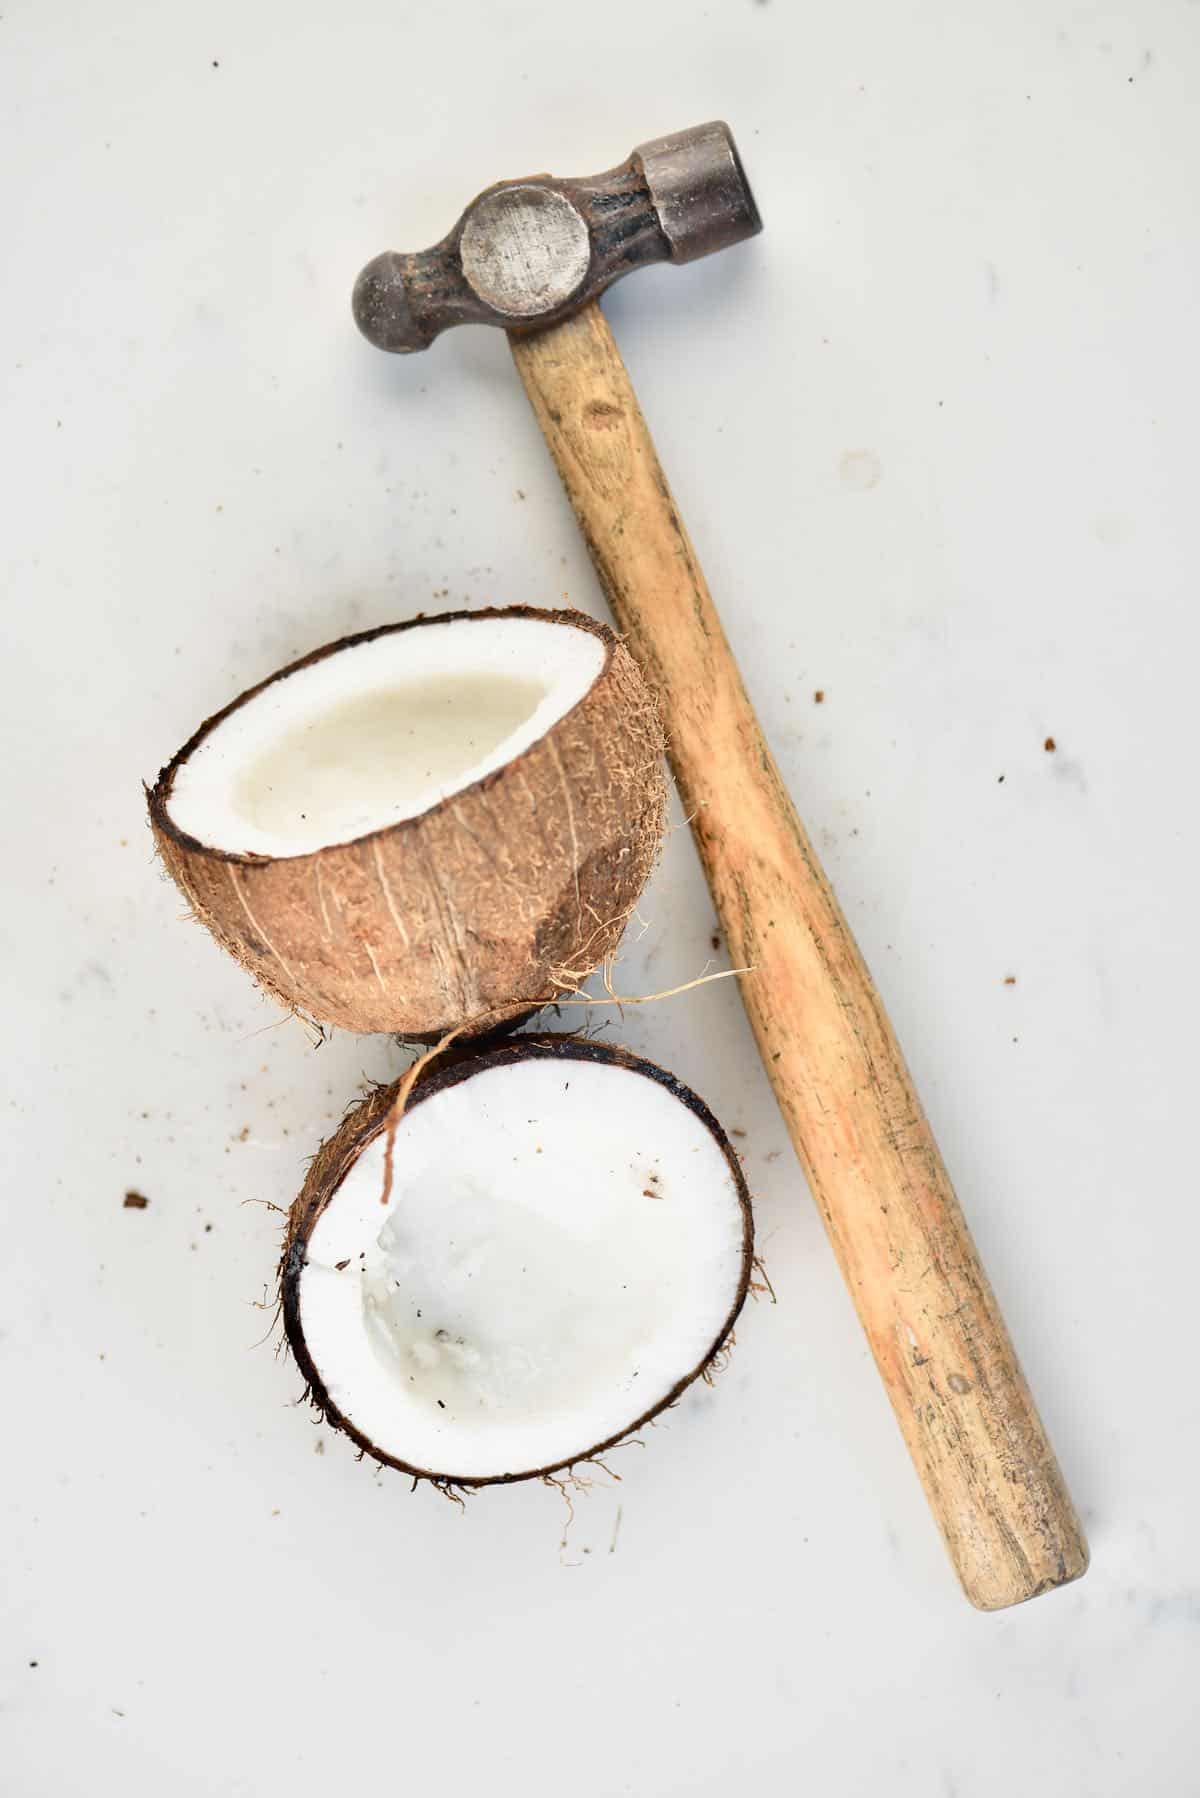 An open coconut and a hammer laying on a flat surface